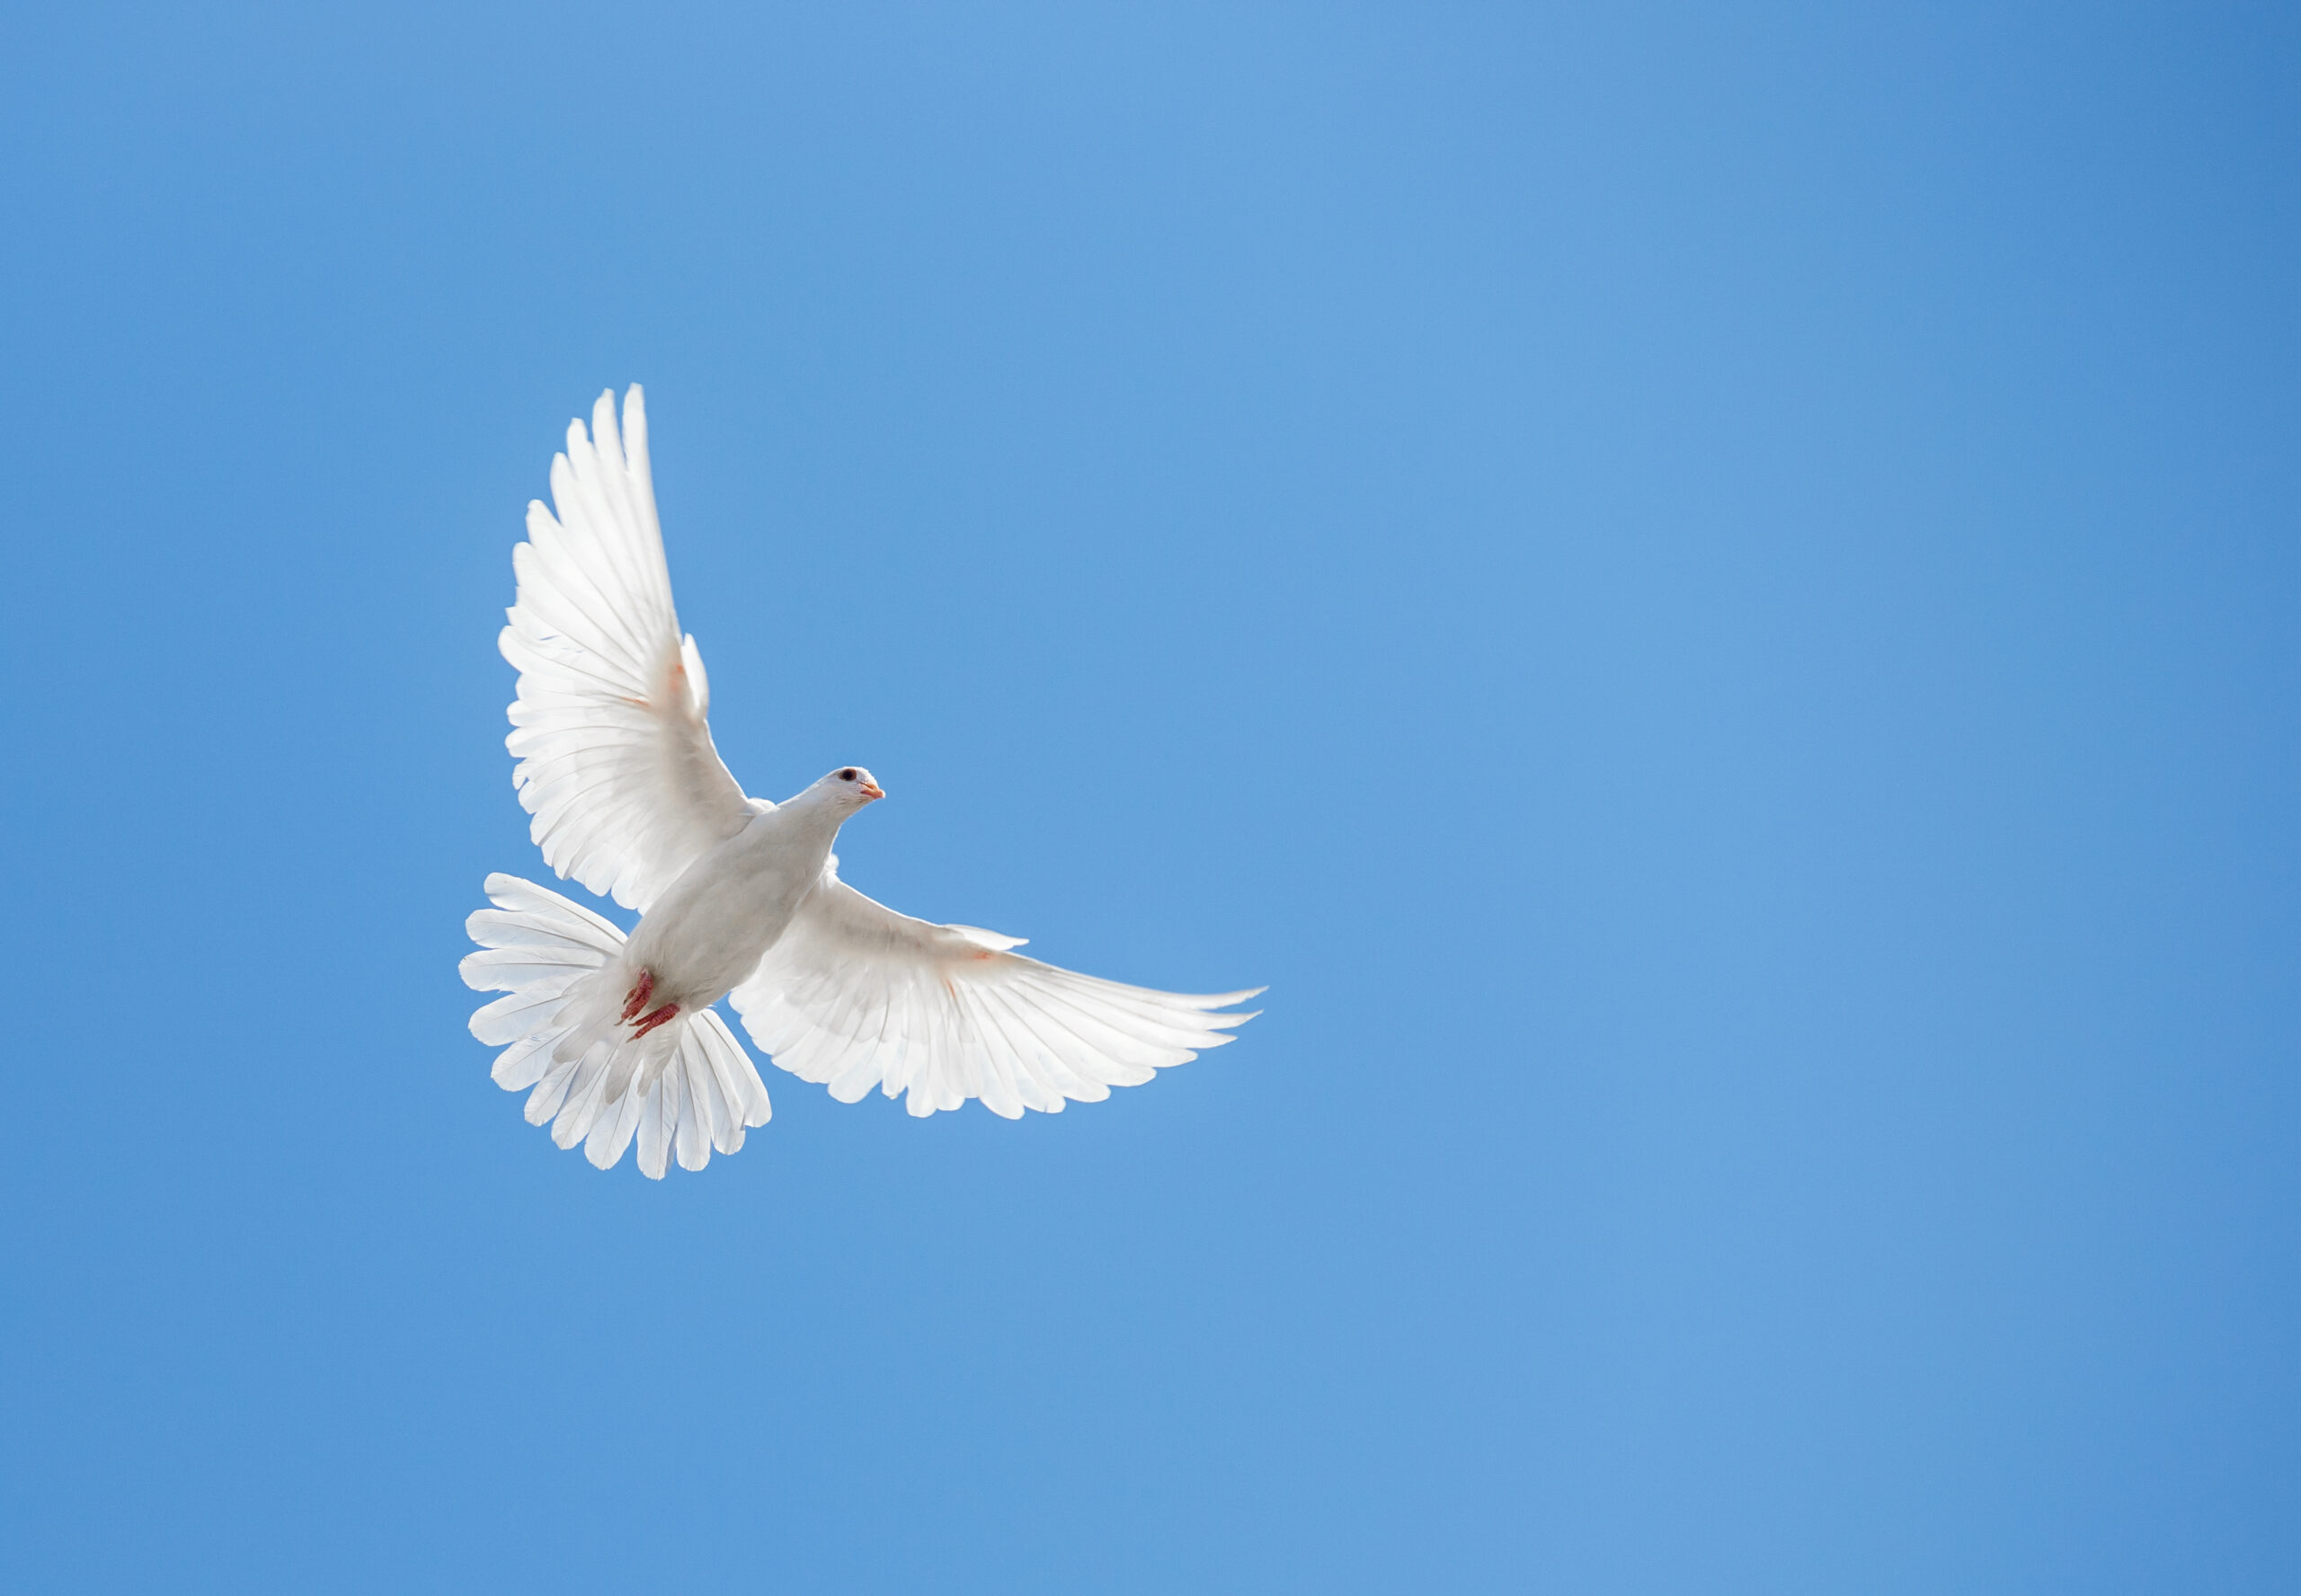 White dove flying above in the bright blue sky